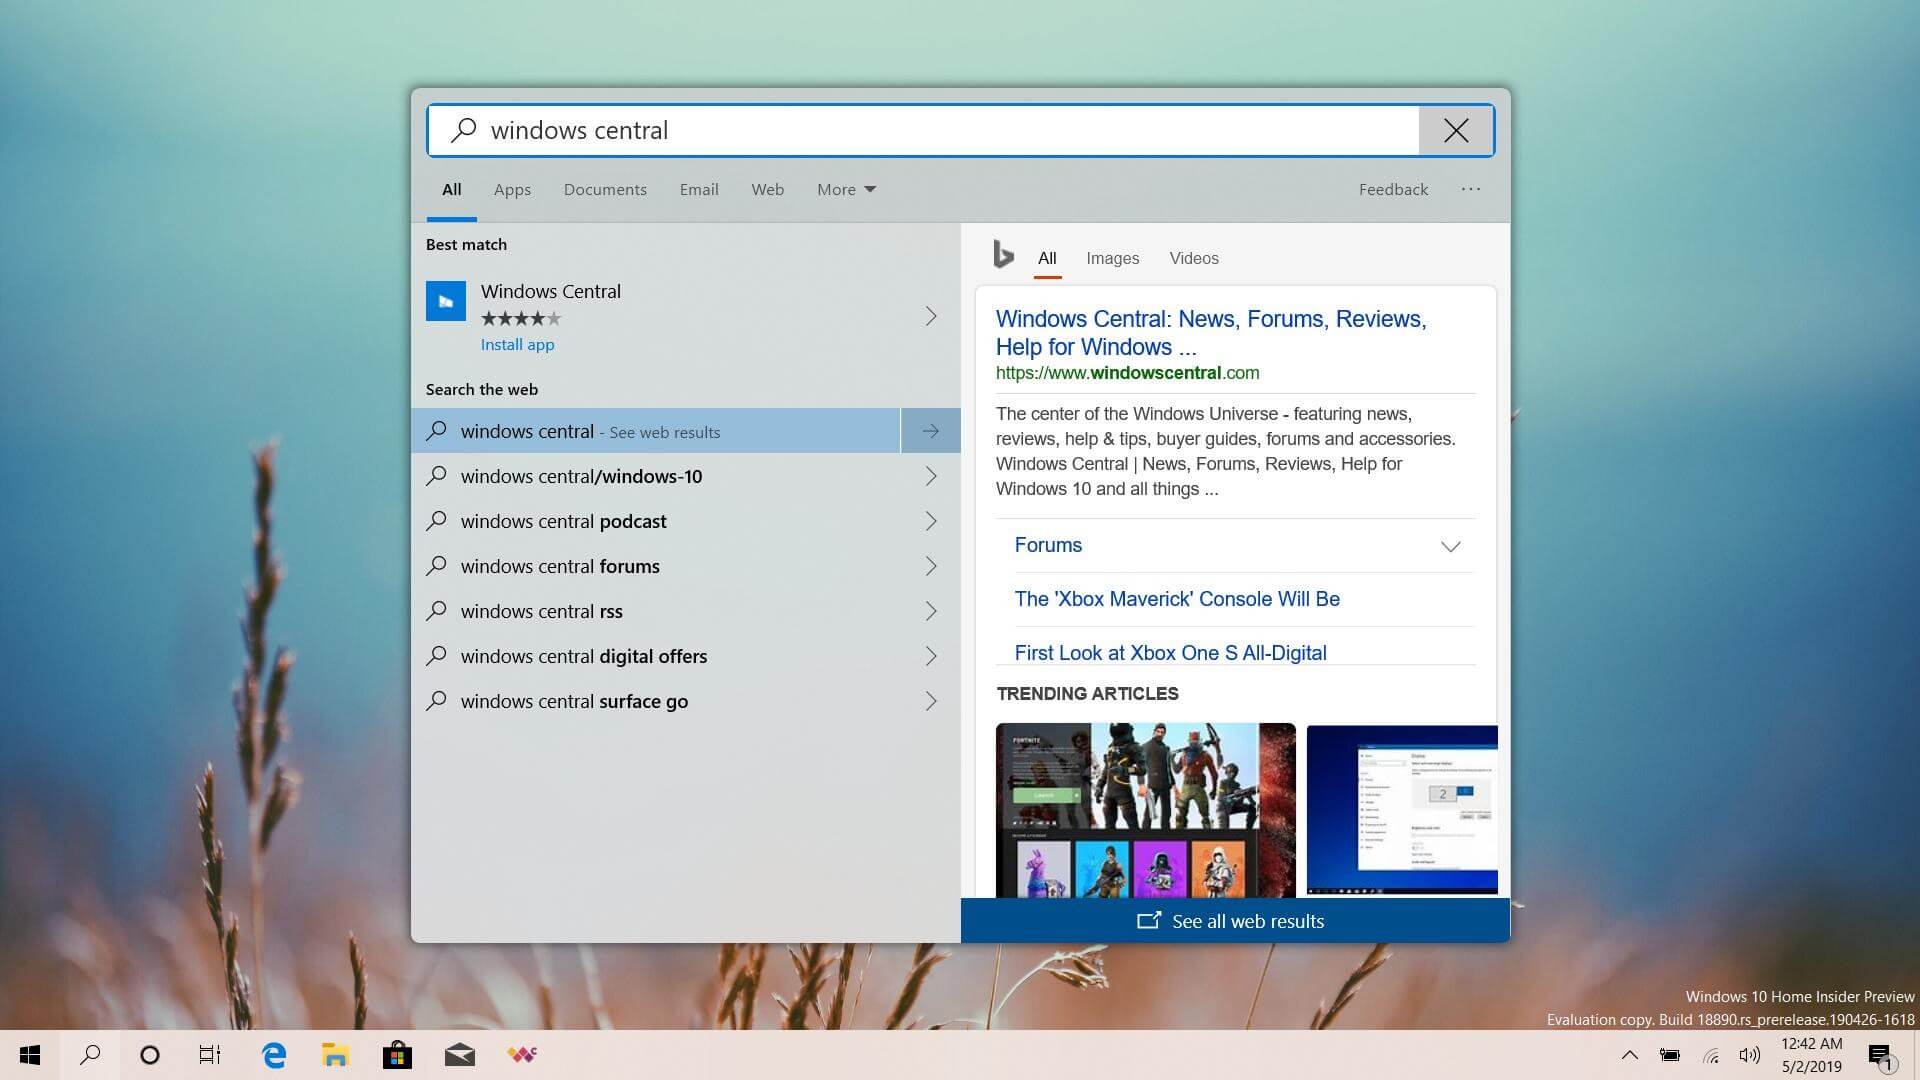 It looks like rounded corners are coming back to Windows